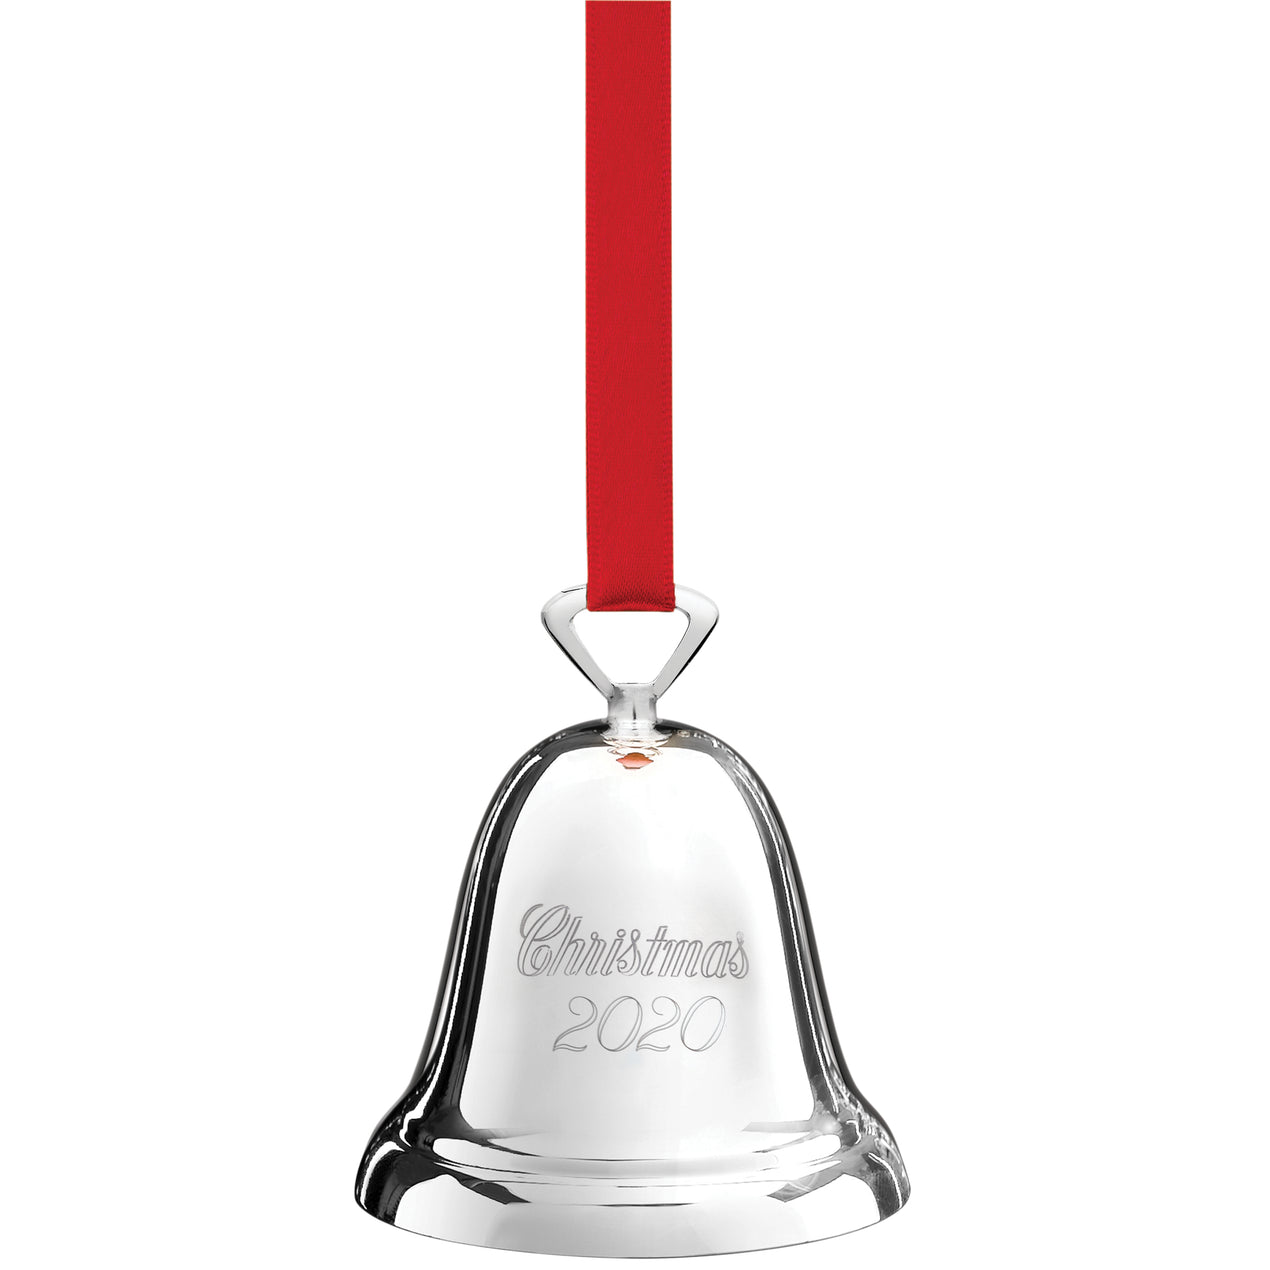 2020 Annual Silverplated Christmas Bell – Reed and Barton